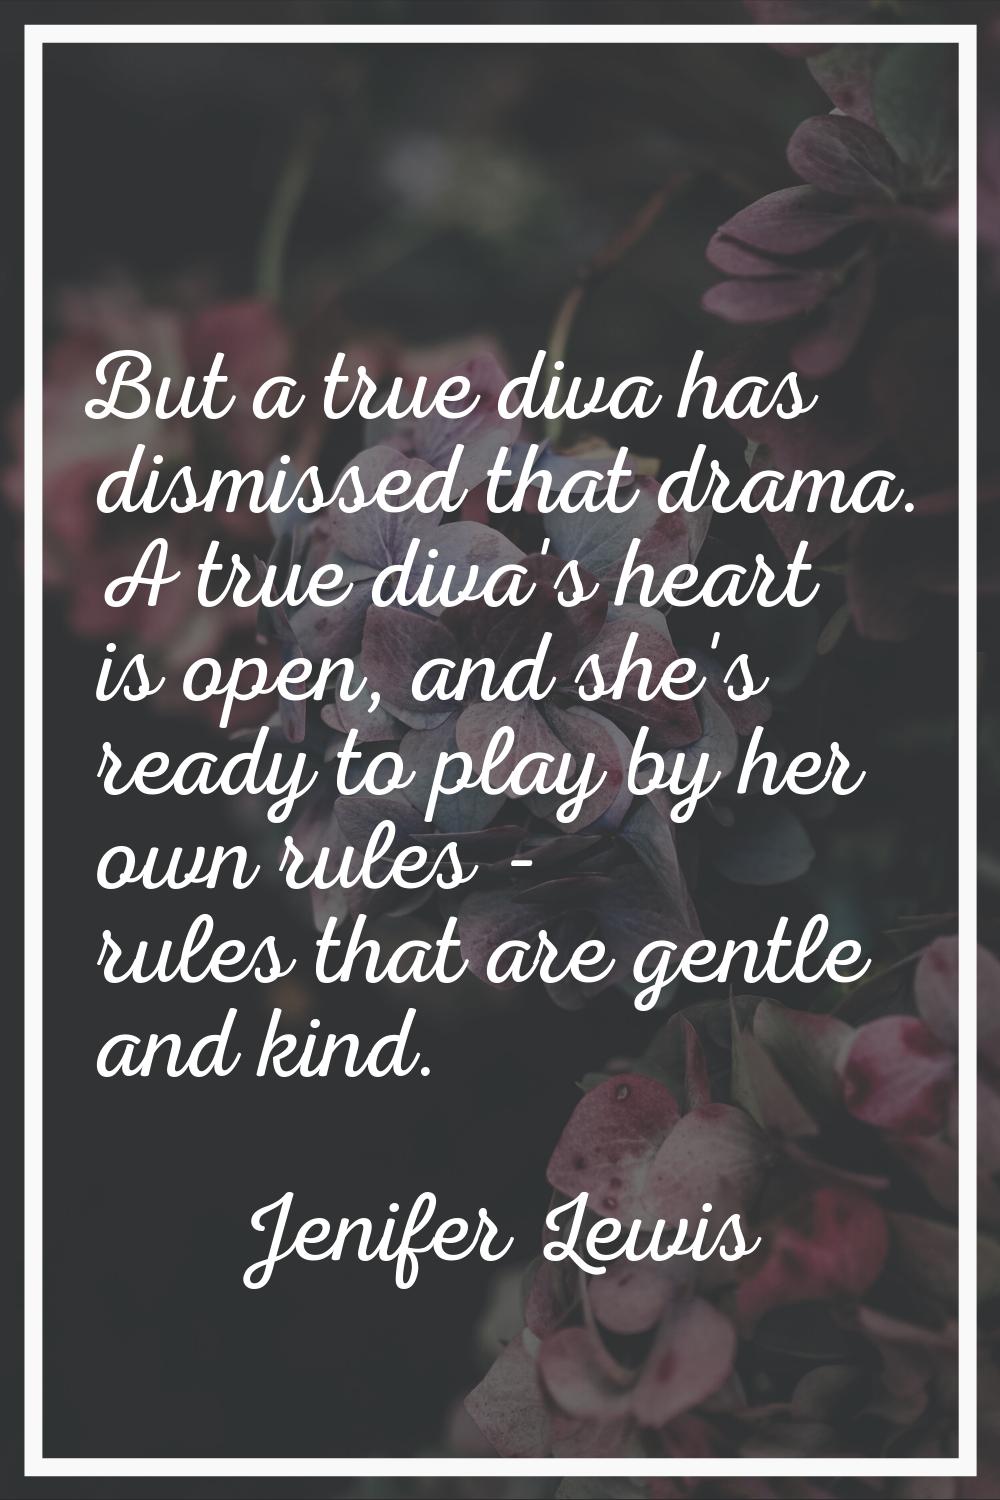 But a true diva has dismissed that drama. A true diva's heart is open, and she's ready to play by h